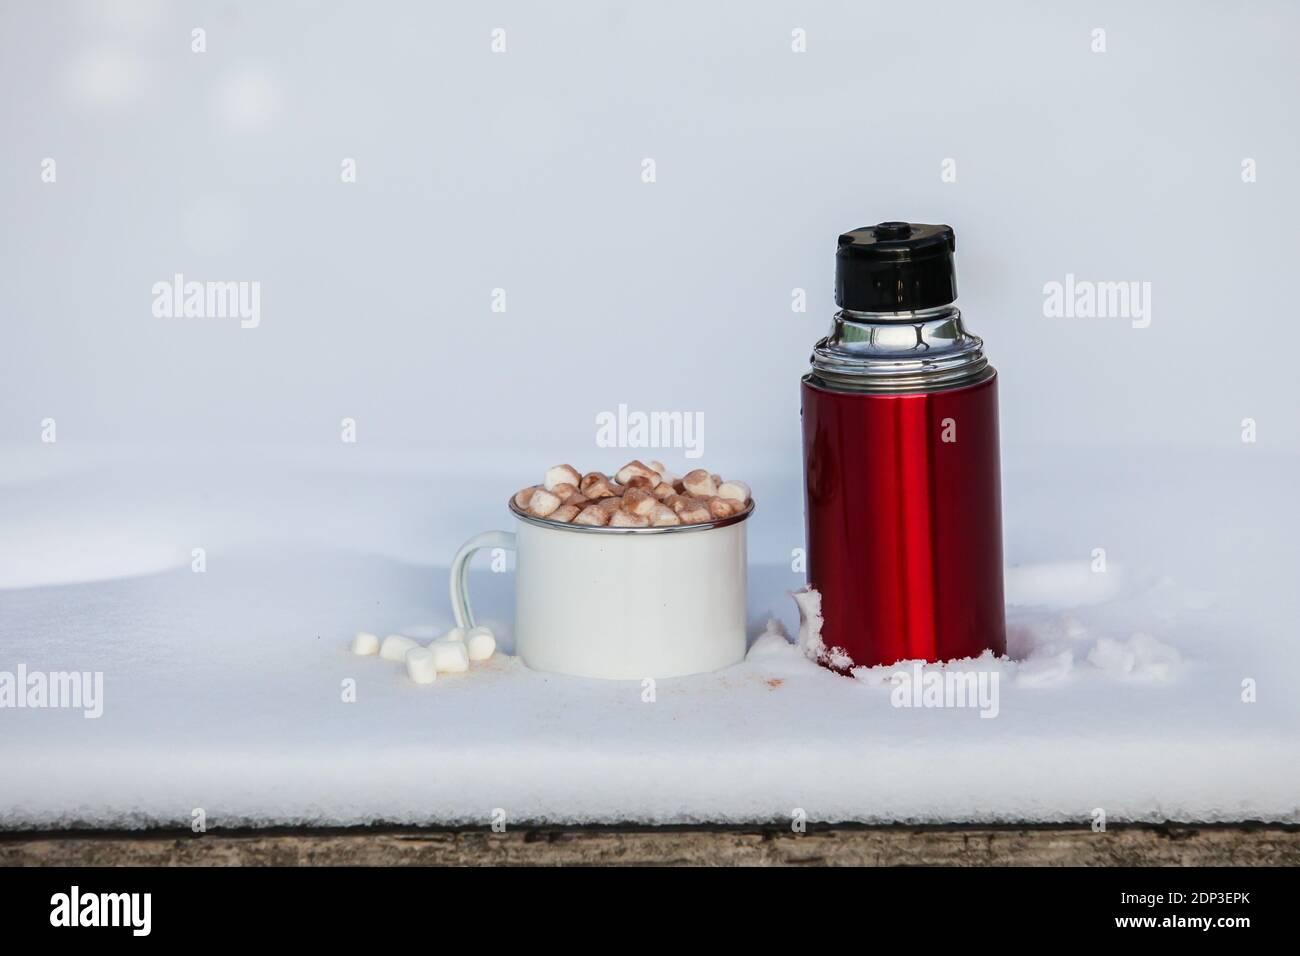 https://c8.alamy.com/comp/2DP3EPK/red-thermos-next-cup-with-hot-chocolate-with-marshmallows-on-table-with-snow-outside-2DP3EPK.jpg